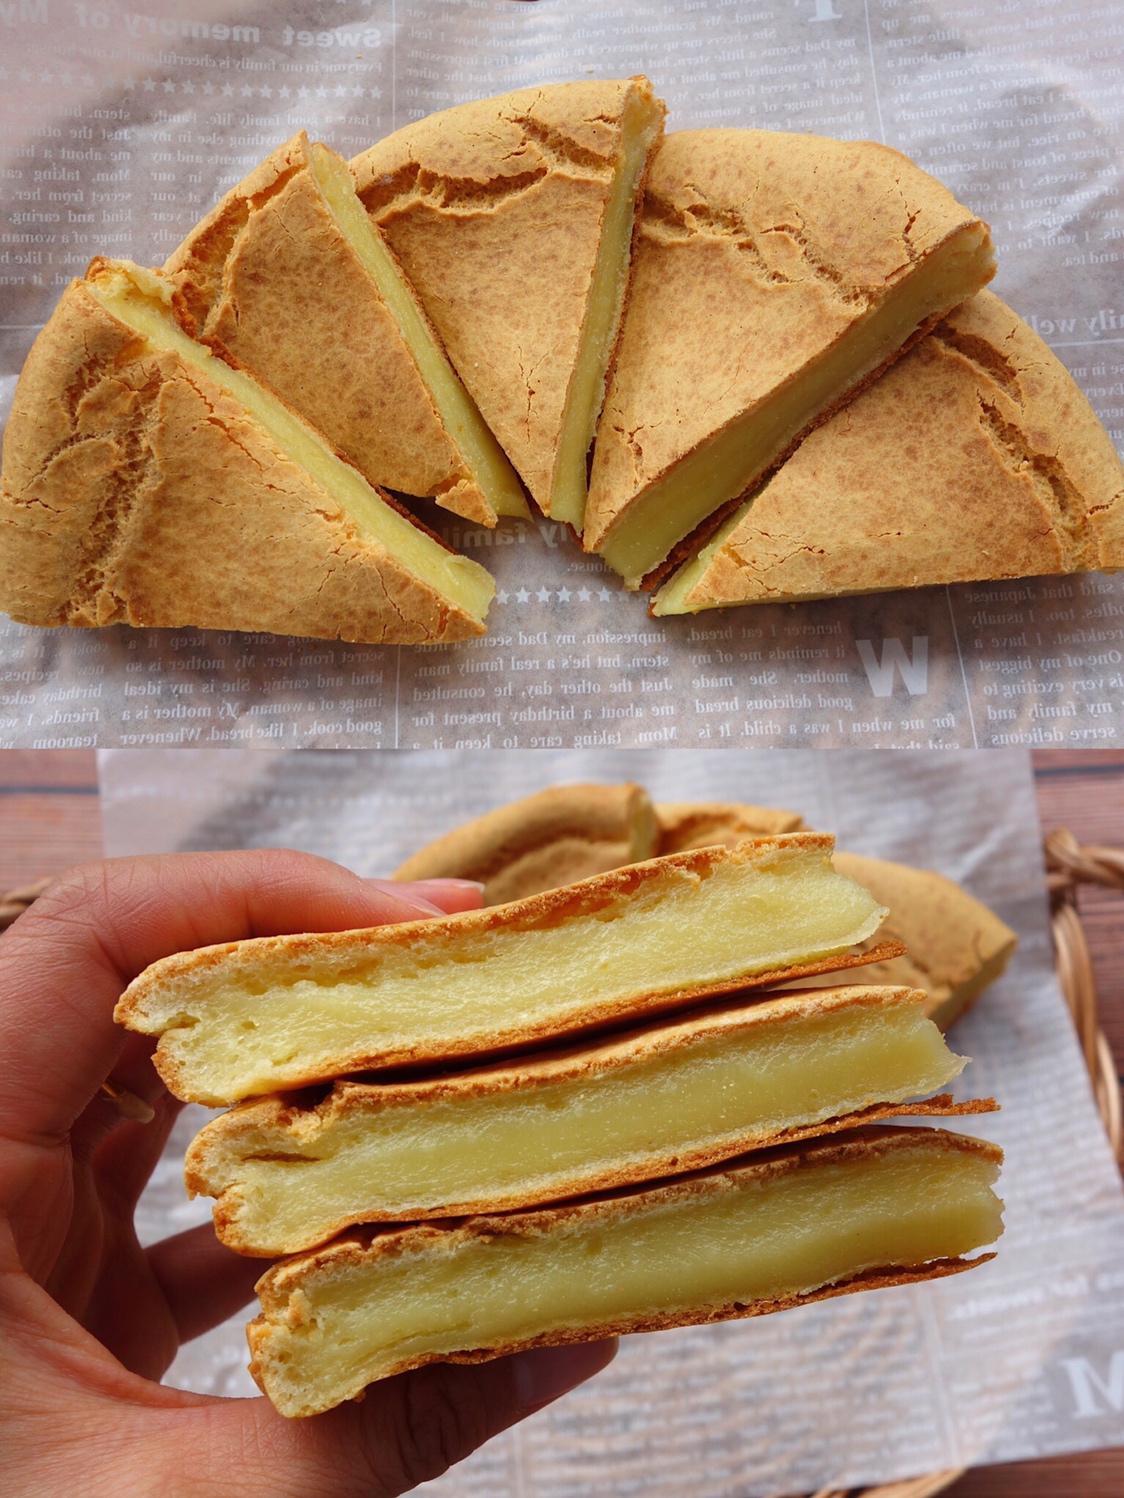 
The practice of the New Year cake that bake, how is the New Year cake that bake done delicious